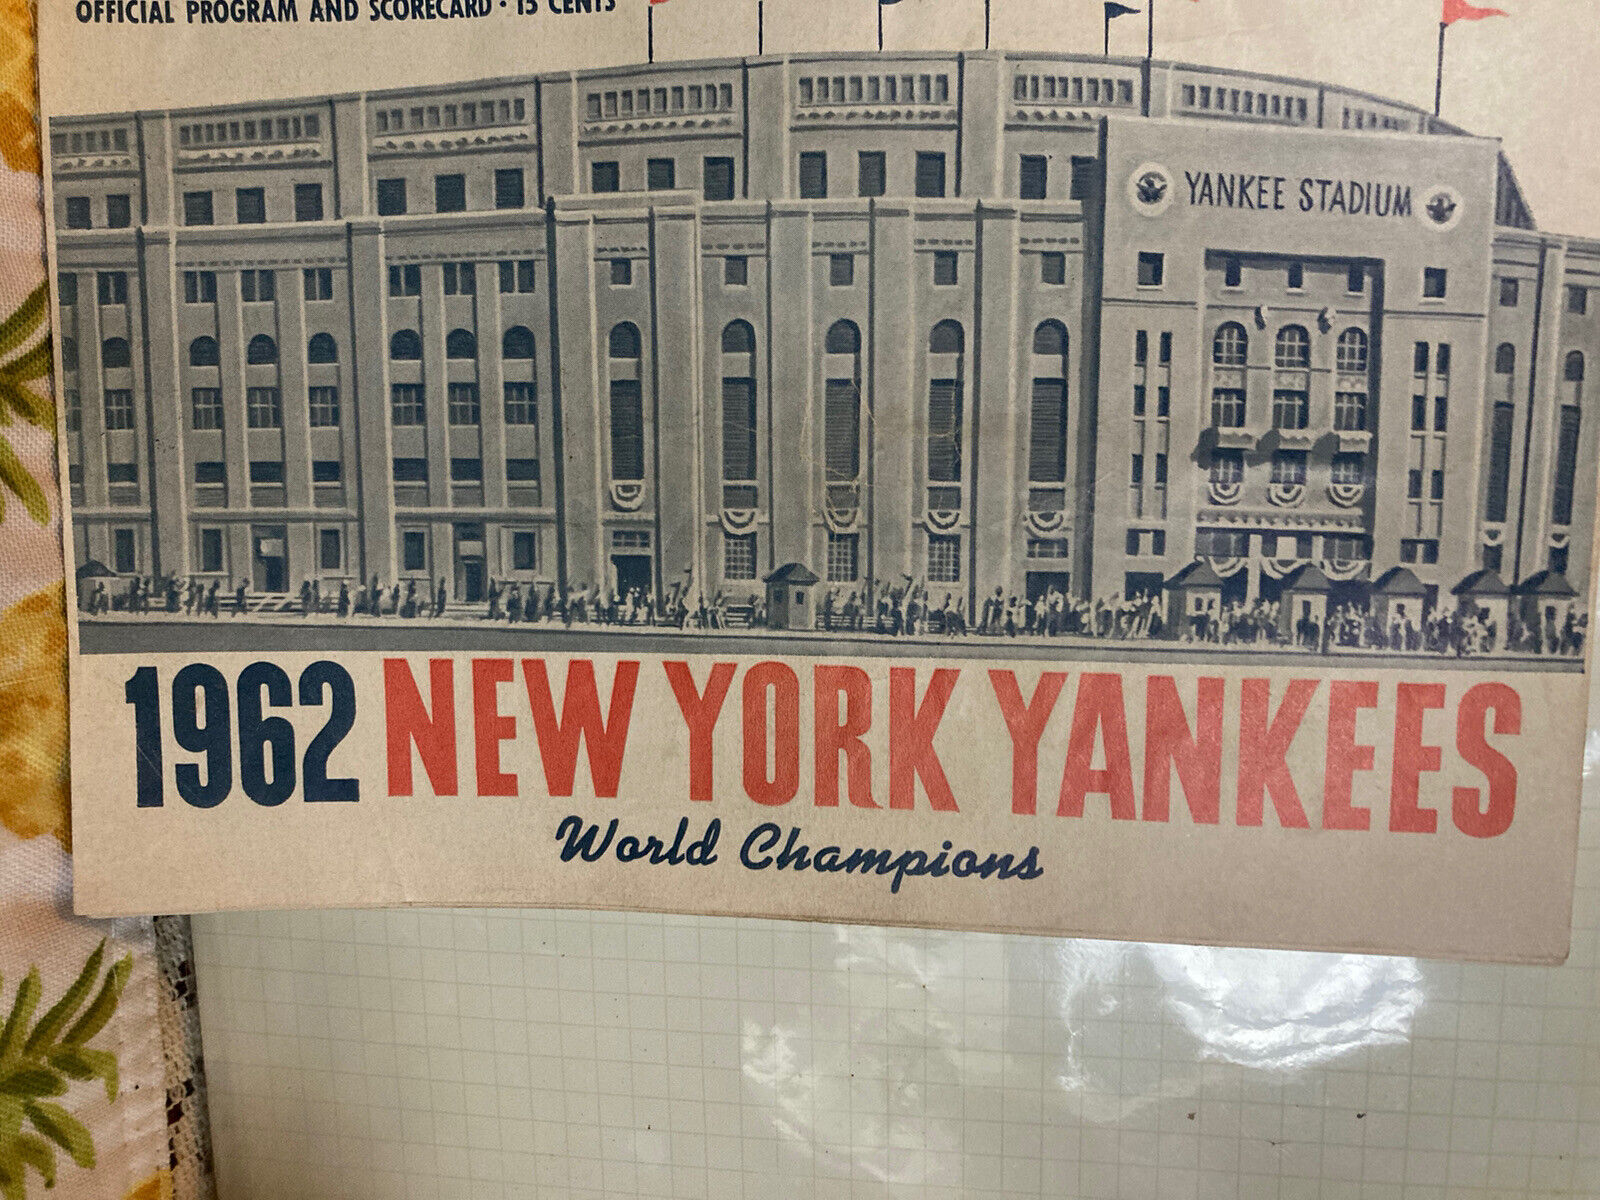 YANKEES program and score card, 1962, great pictures